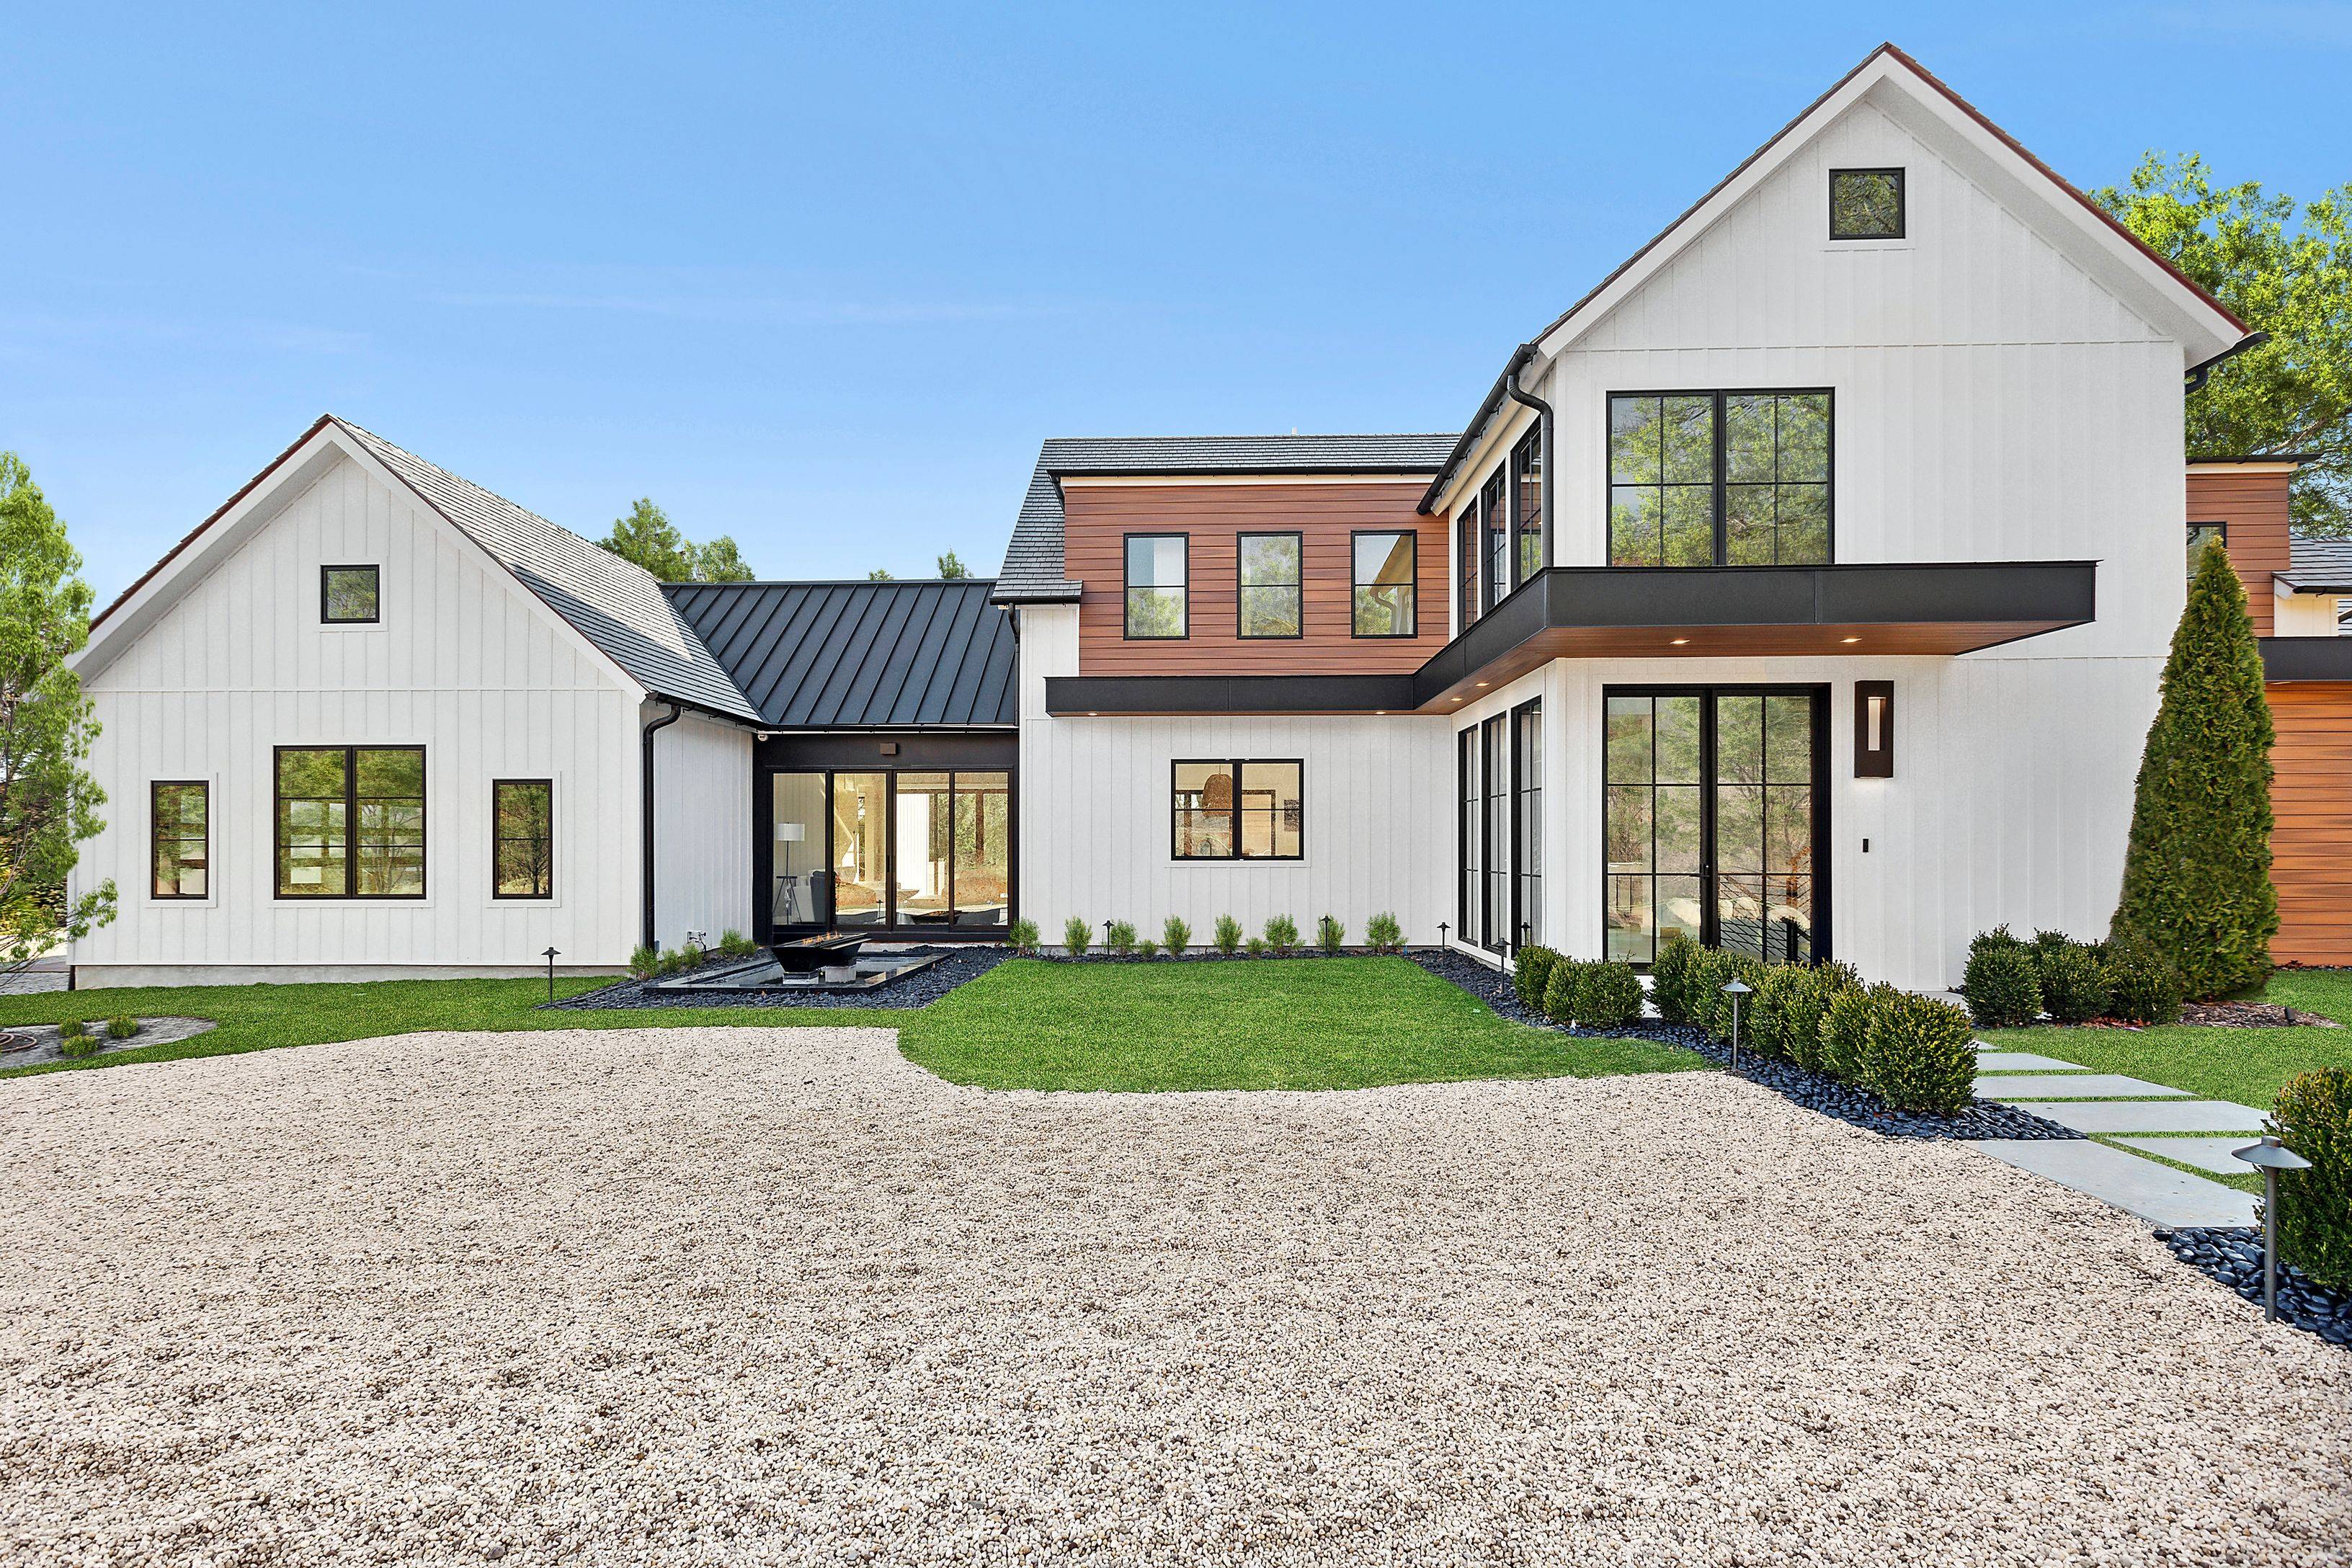 JUST COMPLETED - Stunning Hither Hills New Construction!